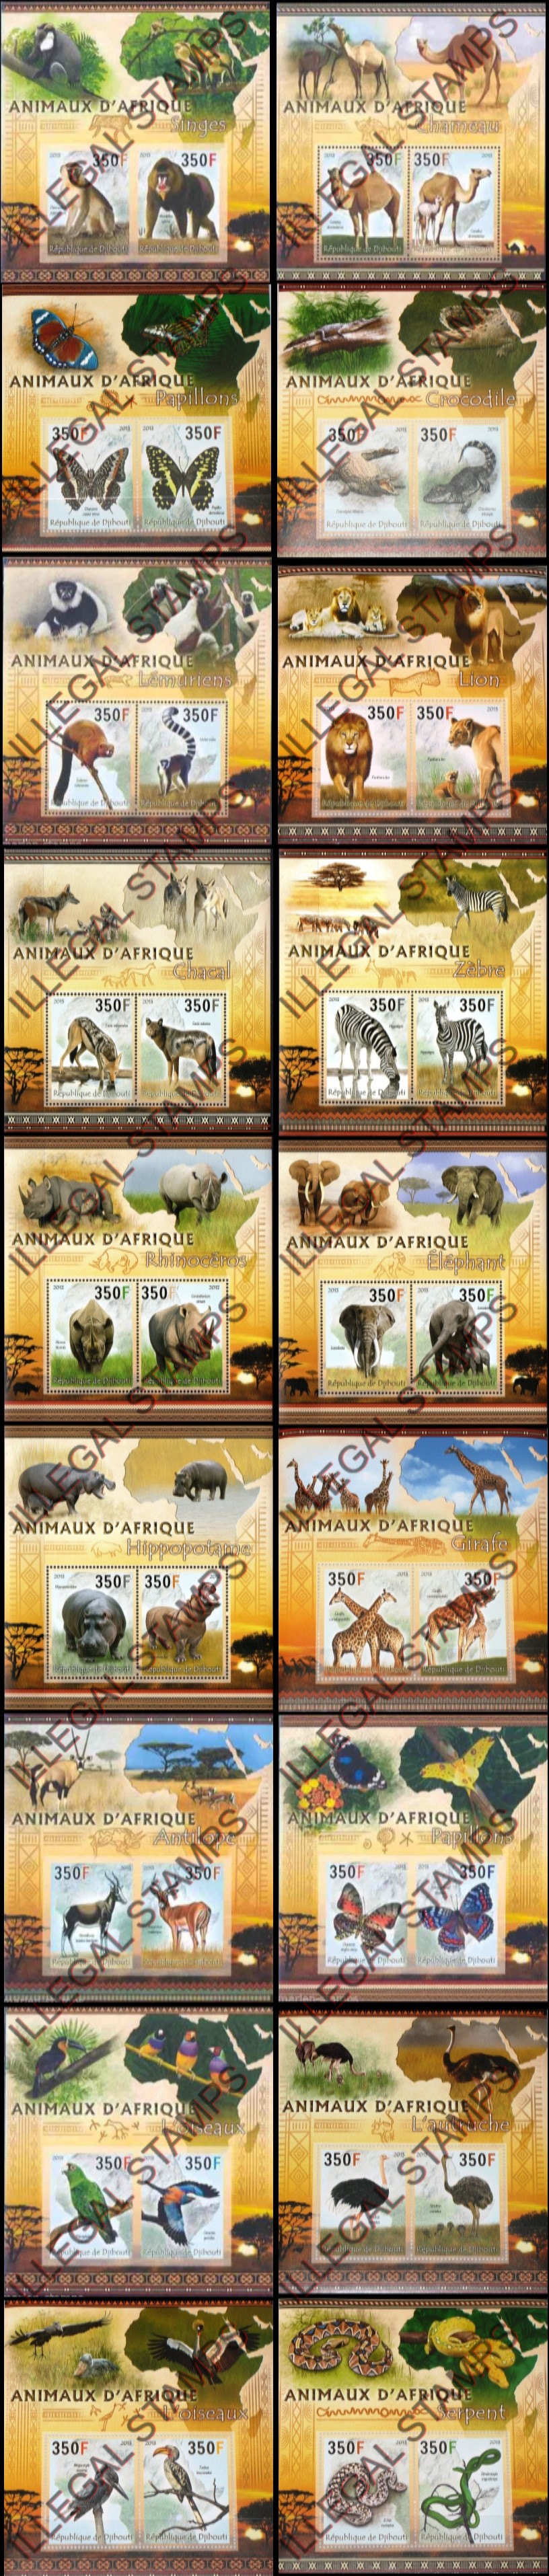 Djibouti 2013 African Animals Illegal Stamp Souvenir Sheets of 2